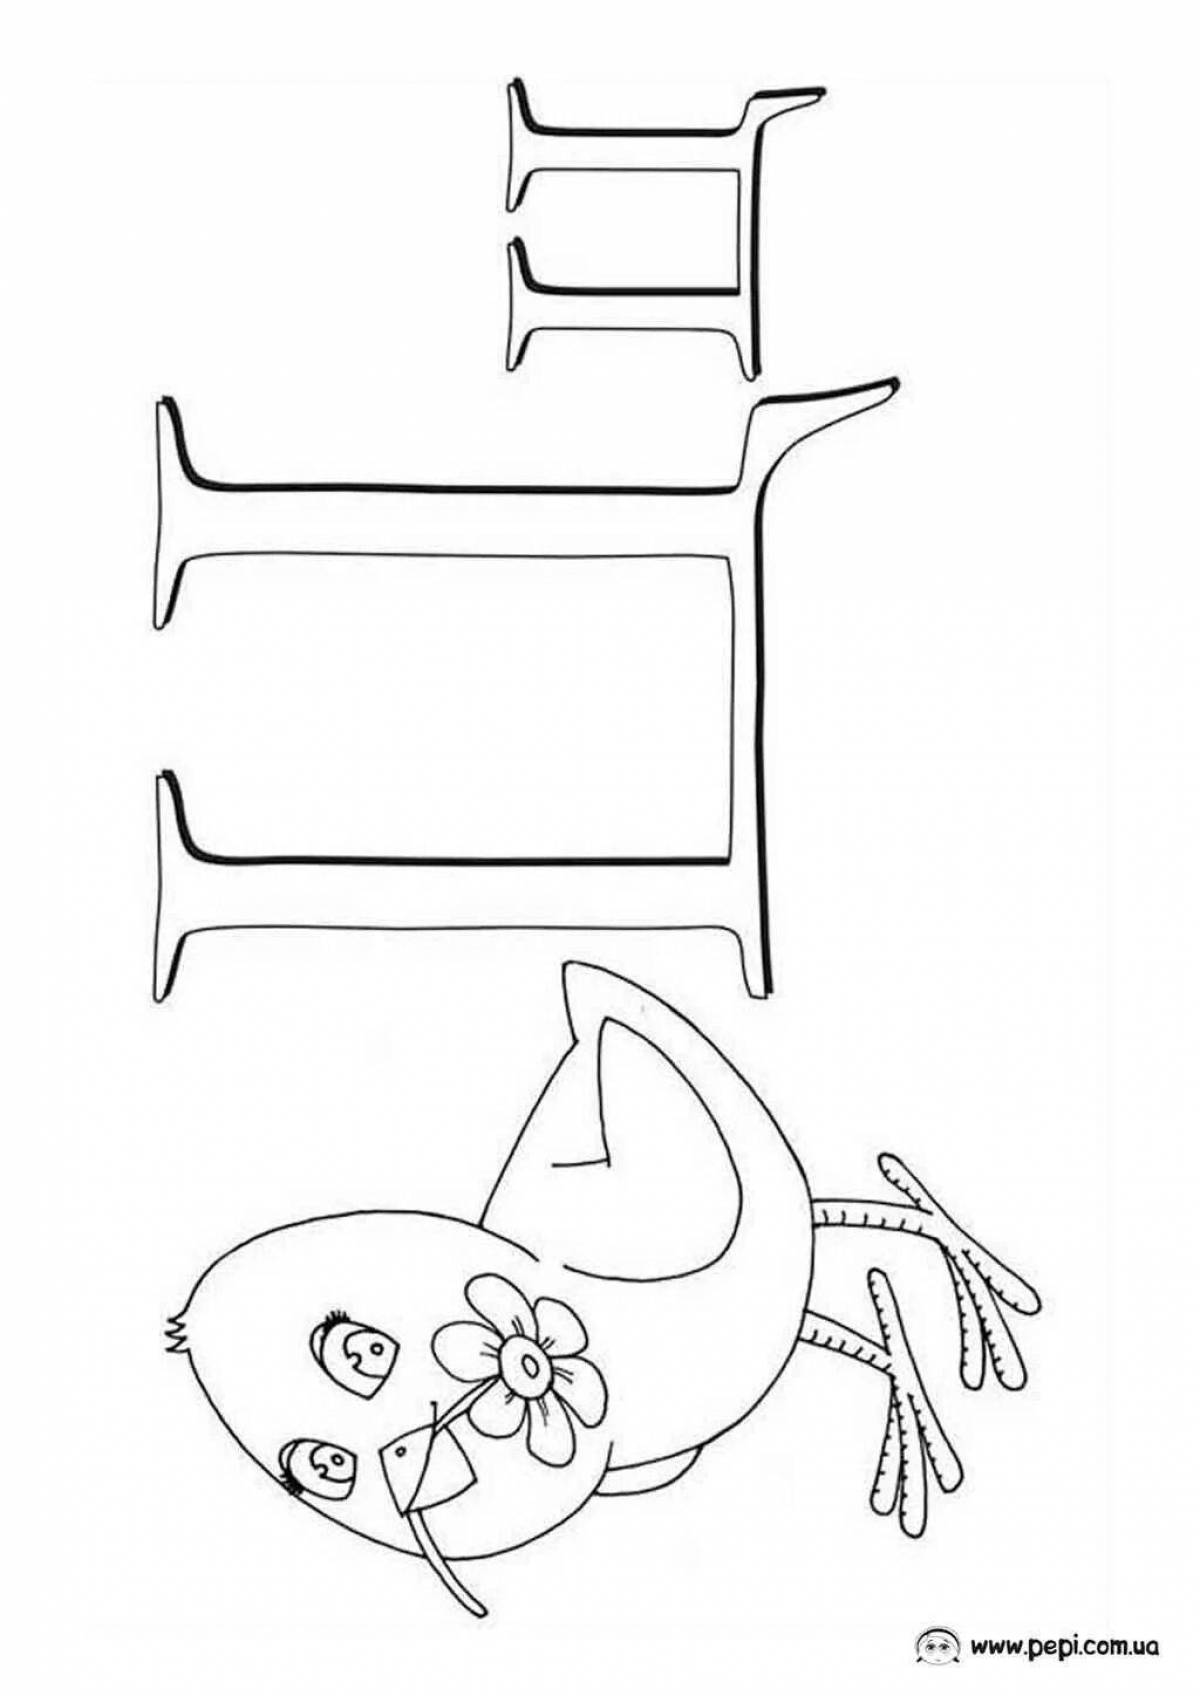 Live coloring page c